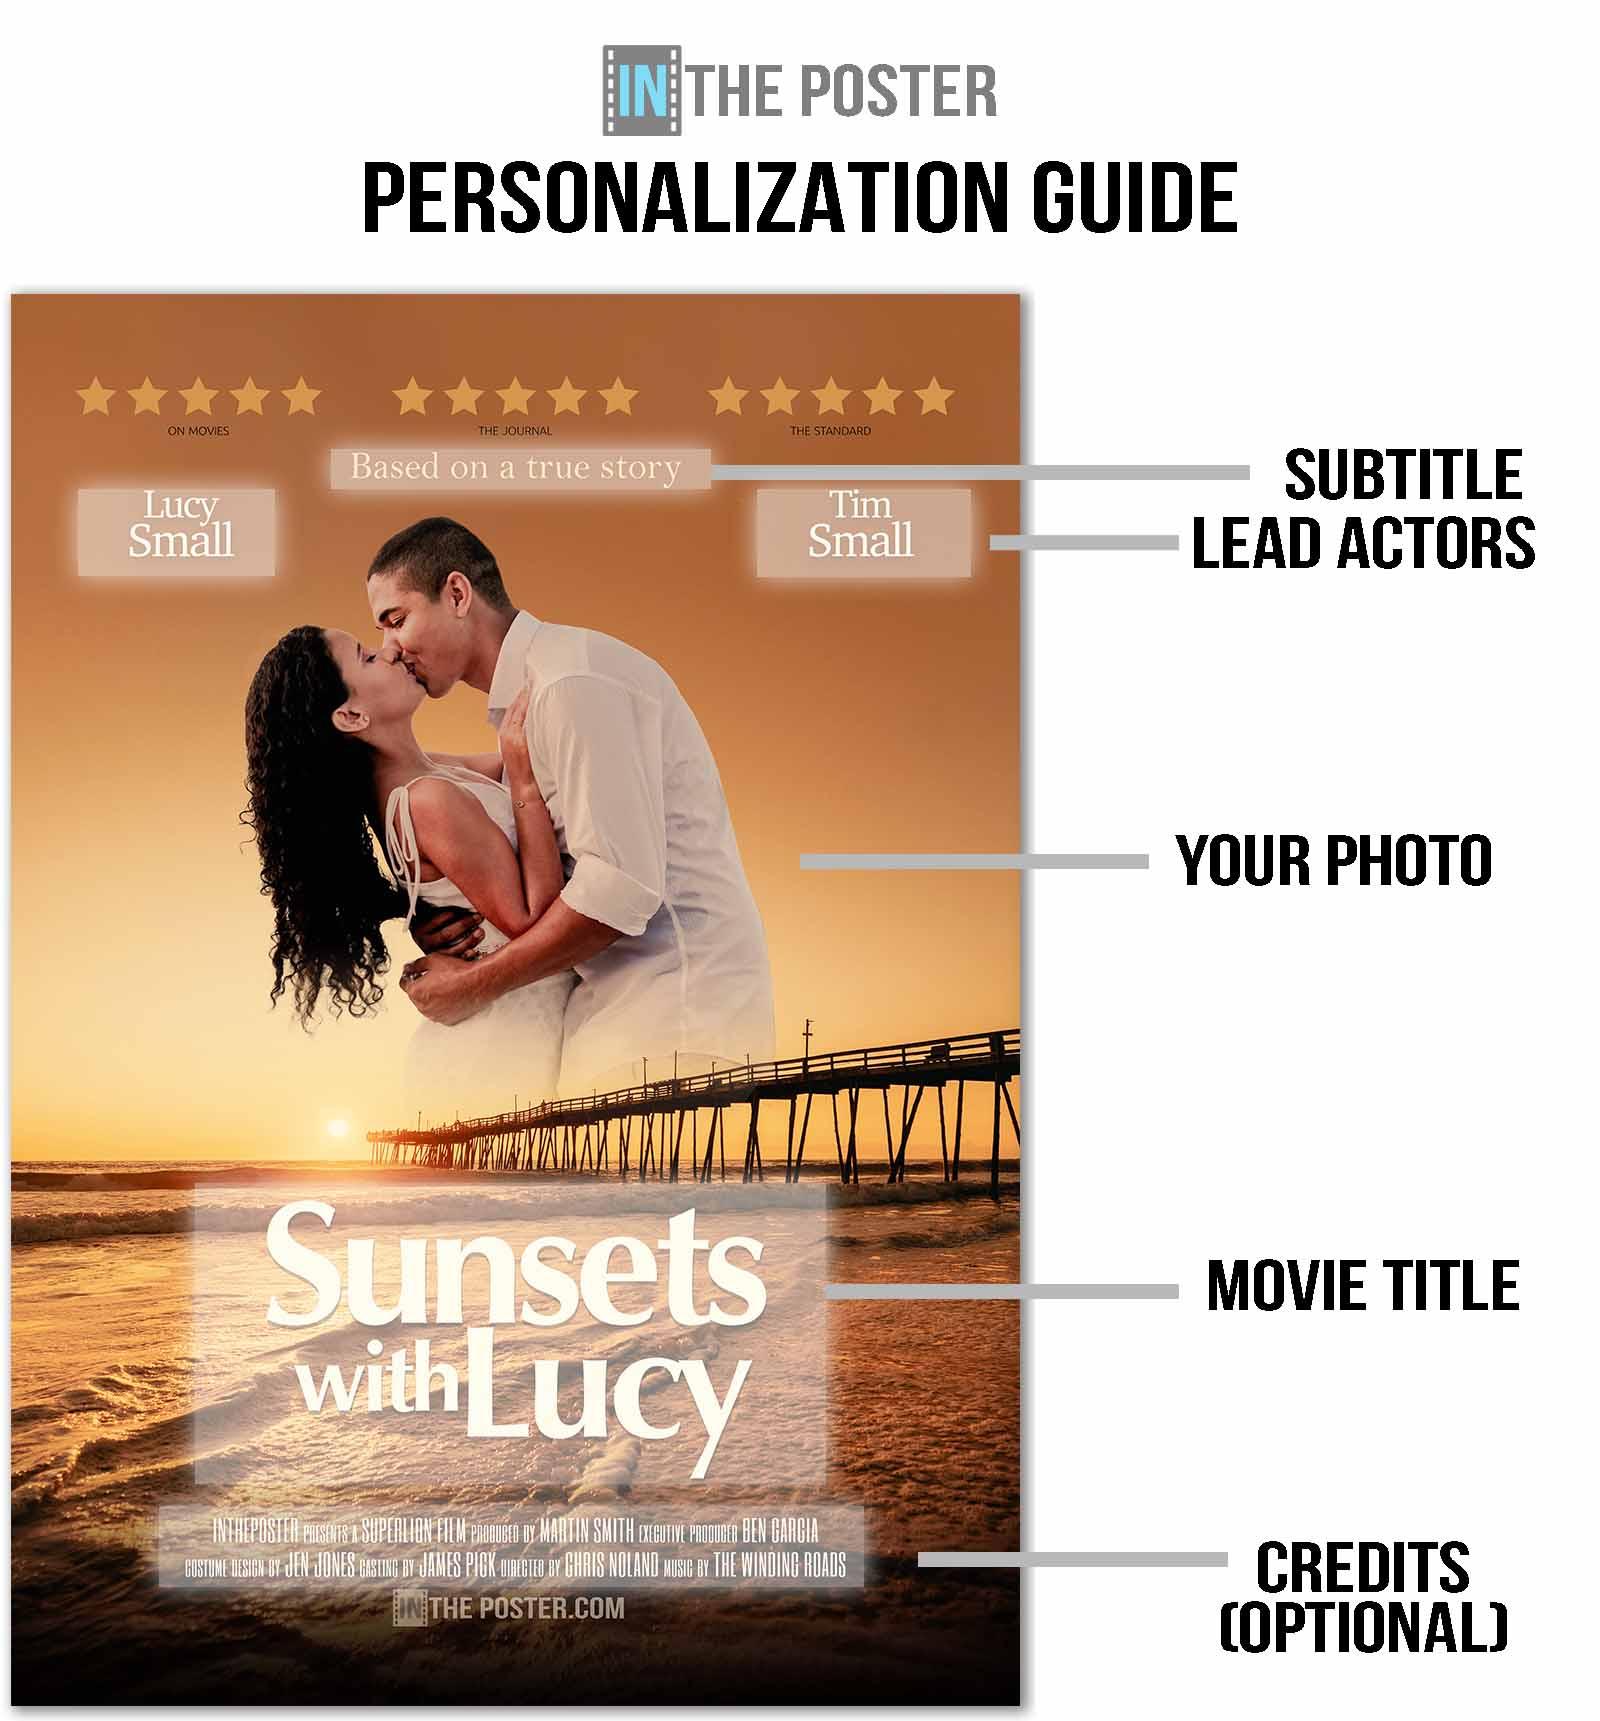 Sunsets With You - Custom Movie Poster Design - In The Poster